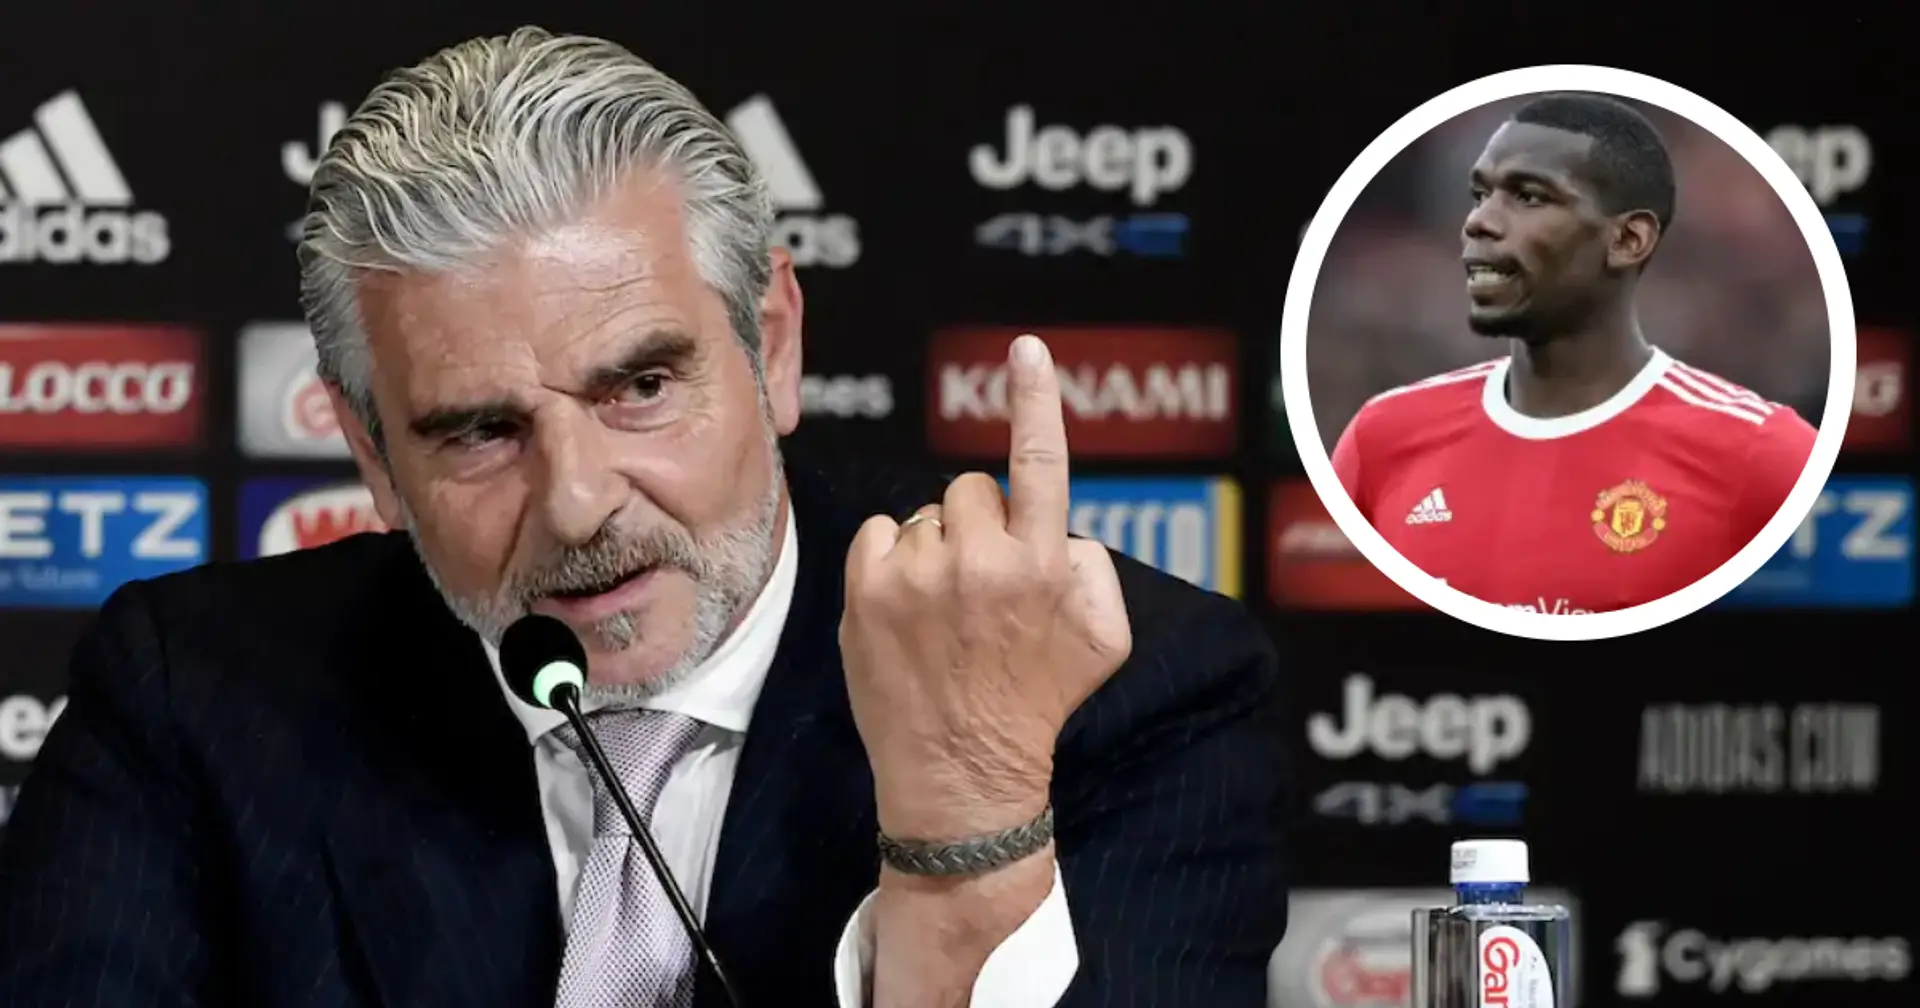 Juventus CEO: 'If we wanted to talk to Pogba, we would first need to speak to Man United'